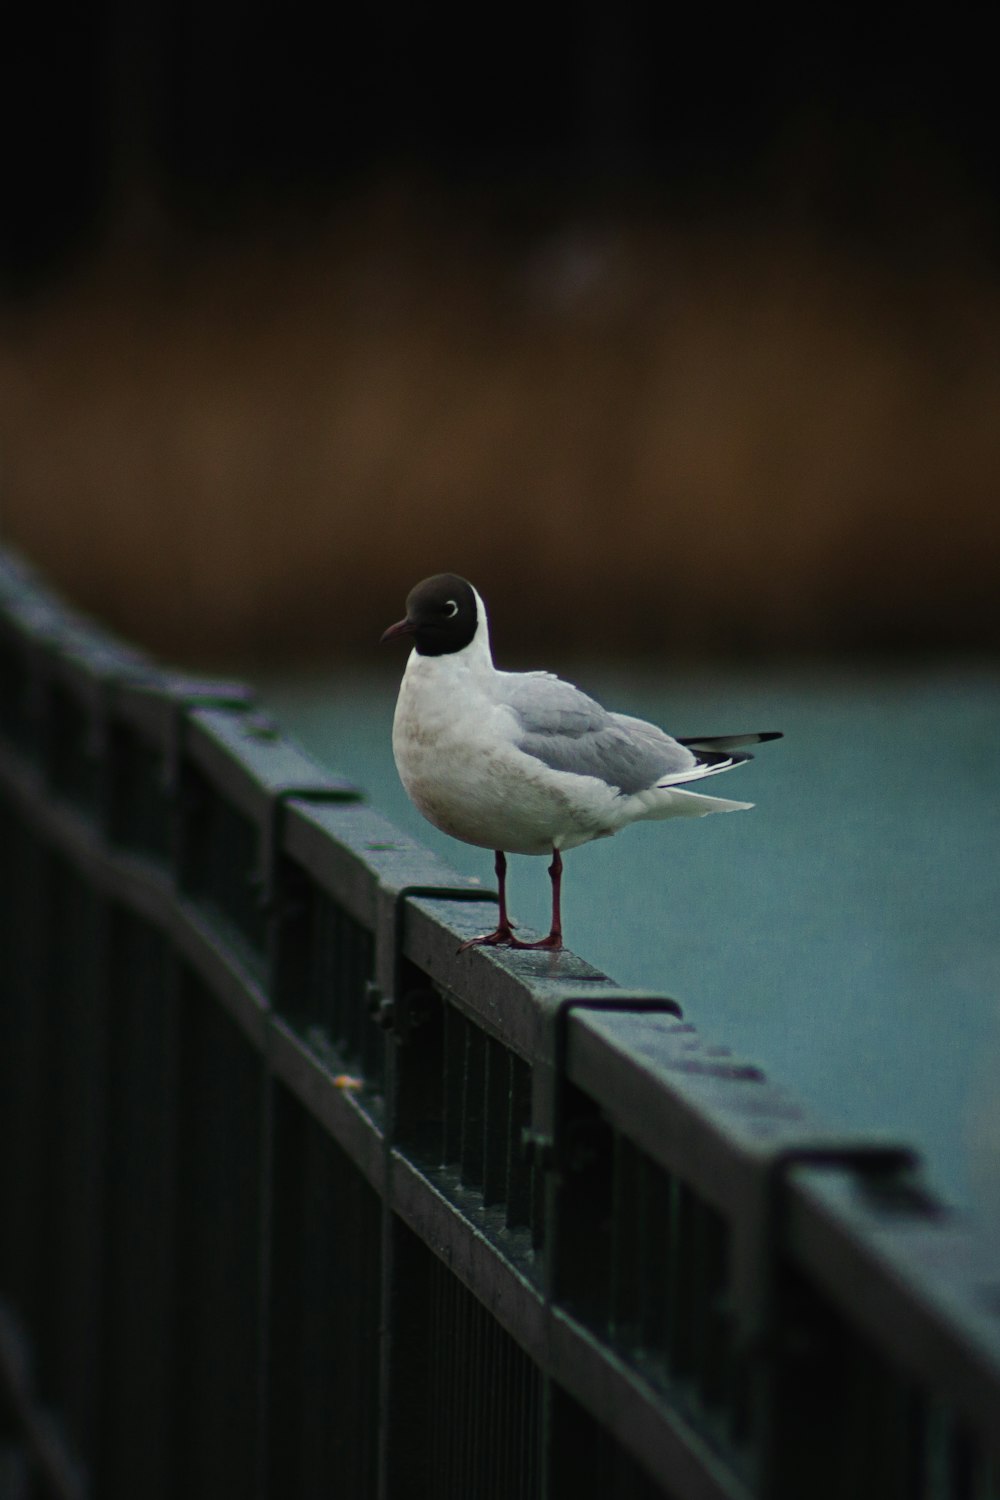 a seagull is standing on a metal rail